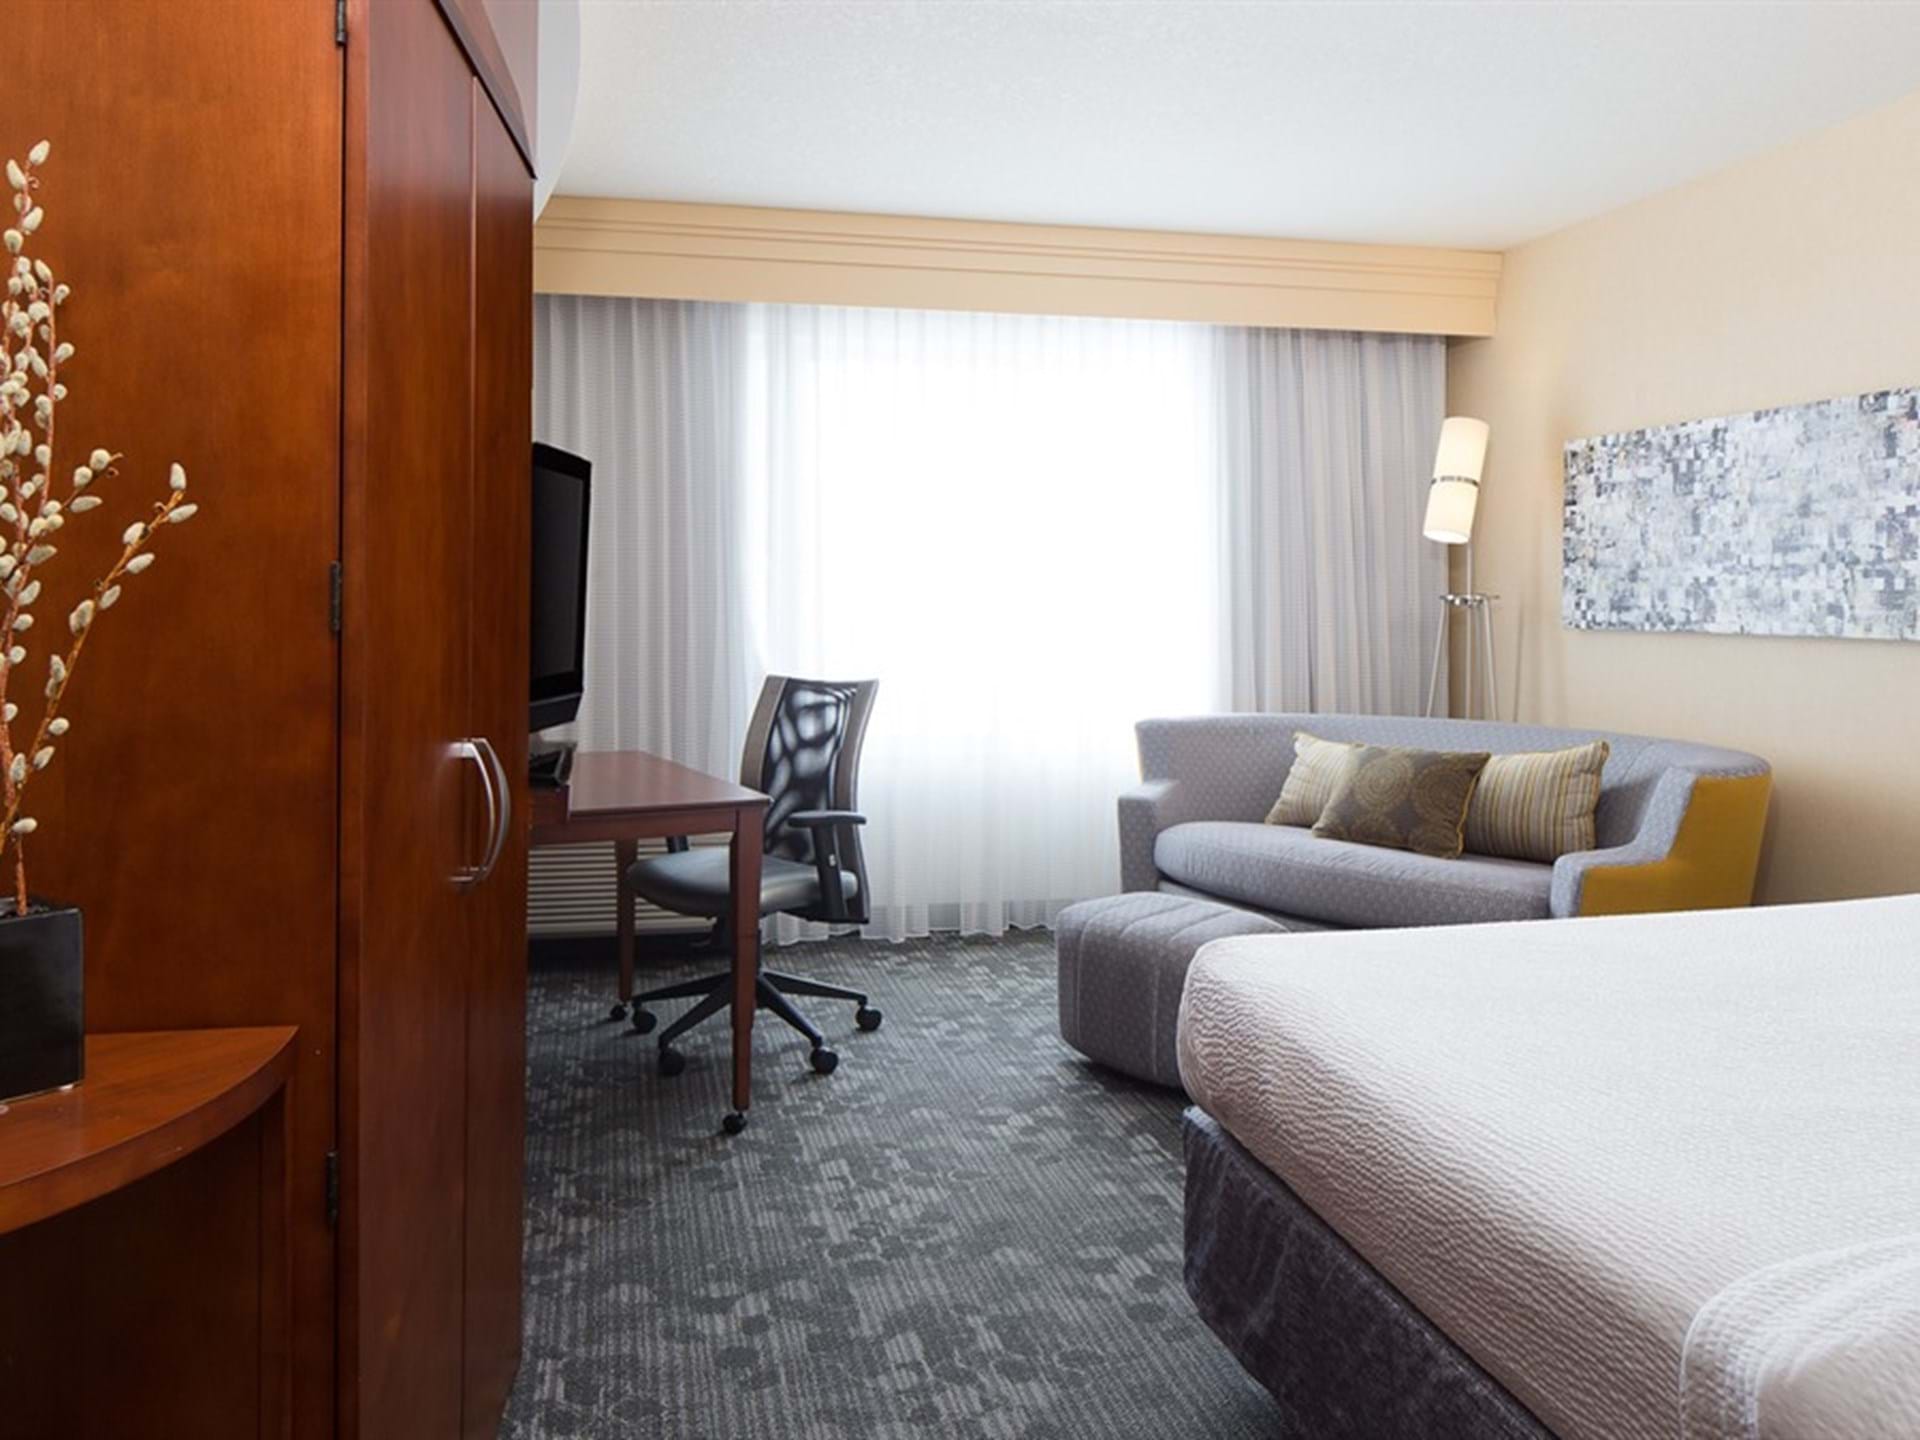 Spacious, comfy, modern guest rooms